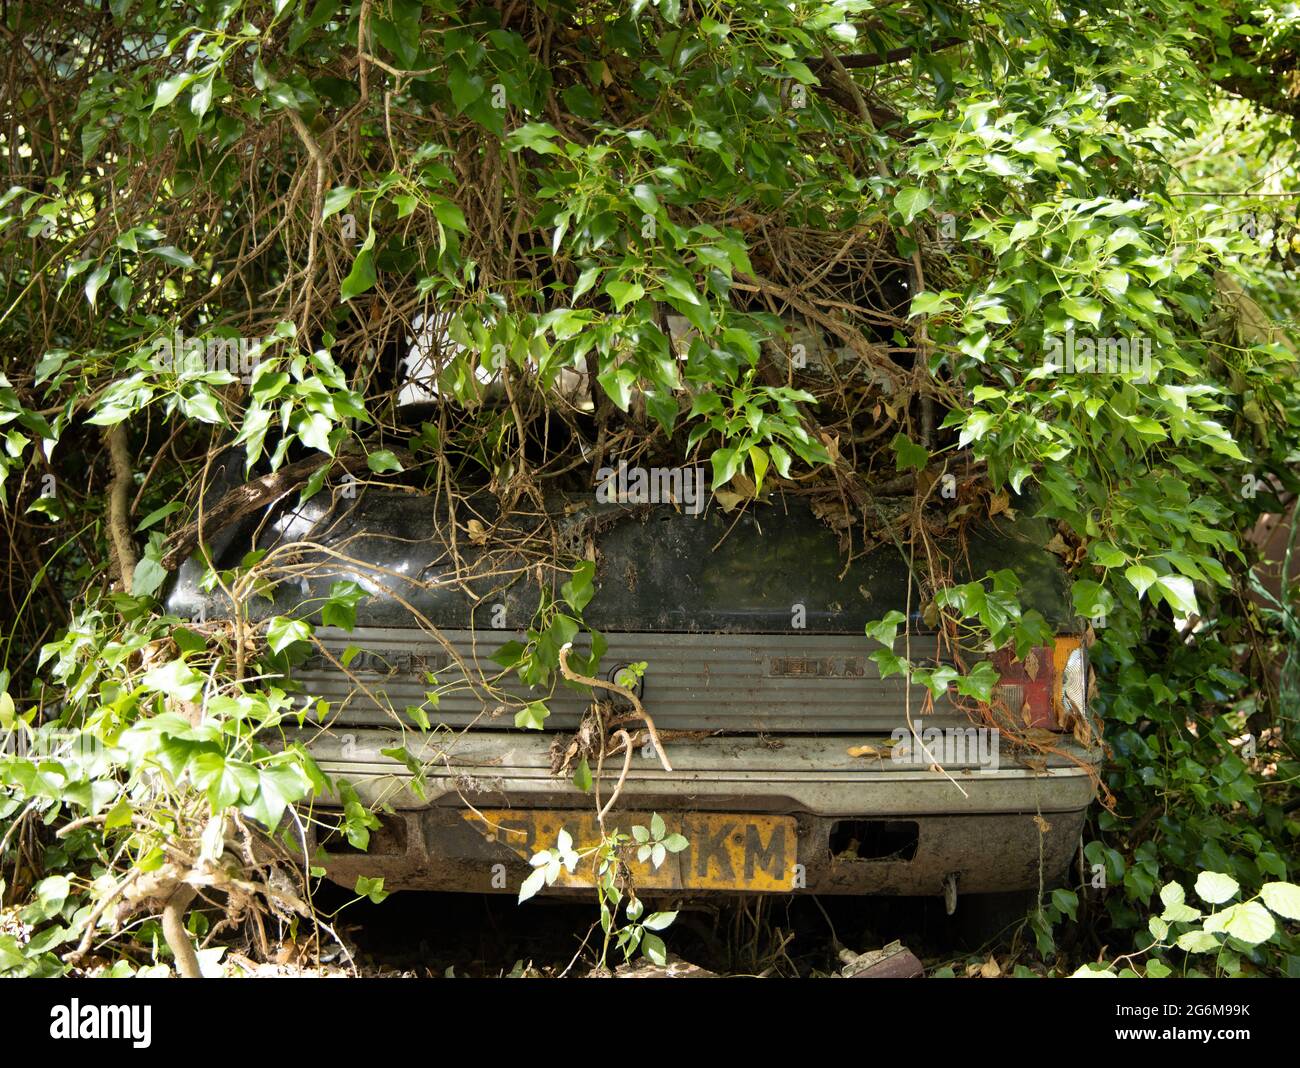 Abandoned overgrown Peugeot car covered by with trees and bushes England Stock Photo